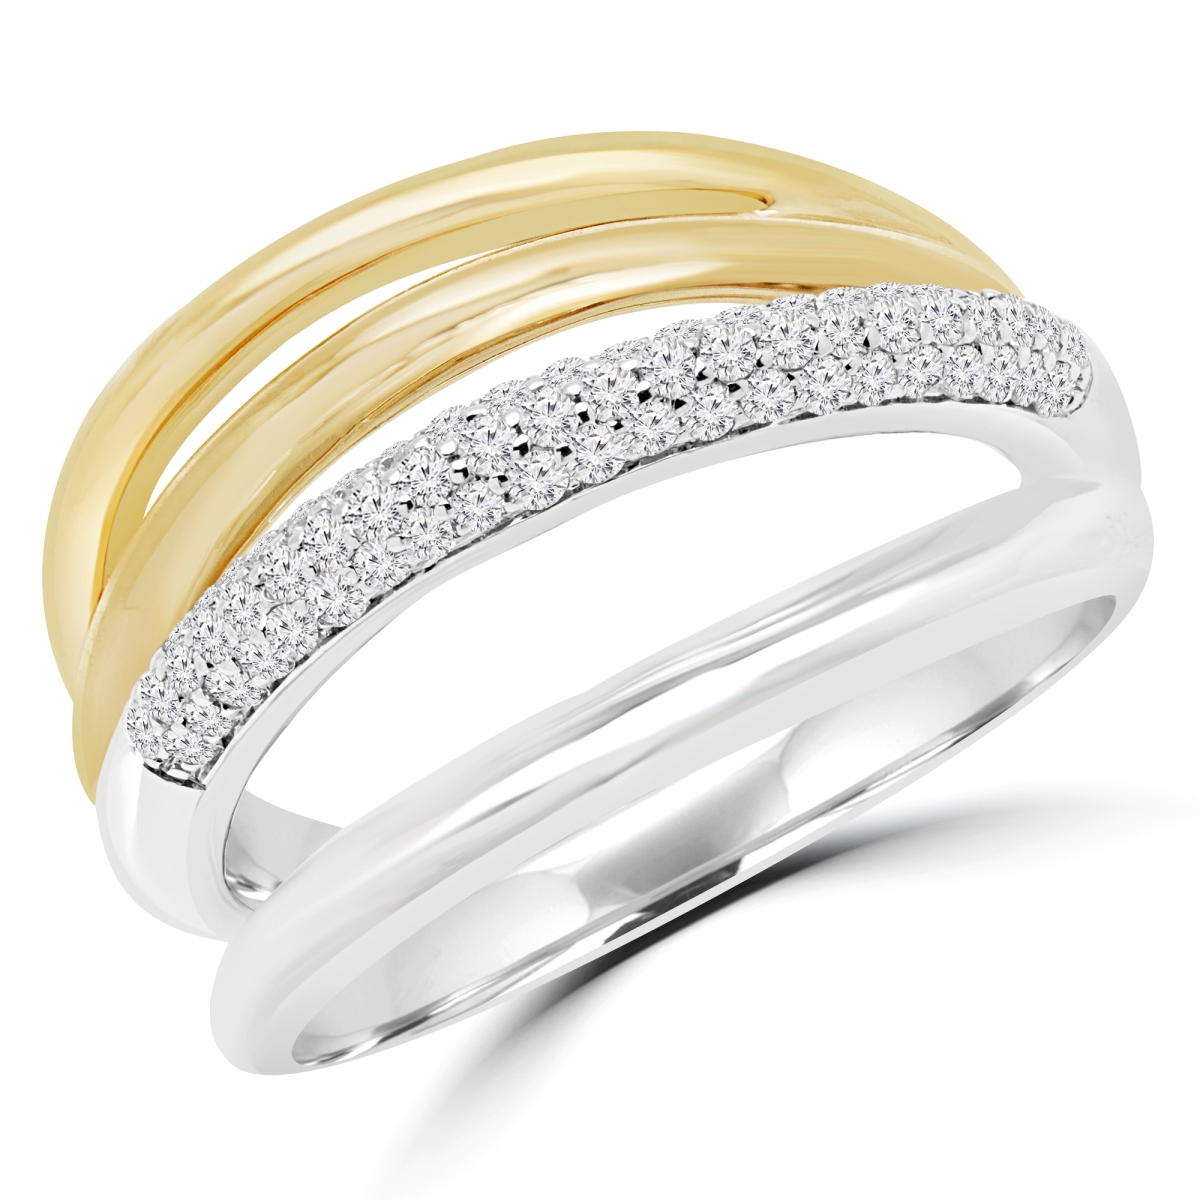 Picture of Majesty Diamonds MDR170050-4.25 0.37 CTW Round Diamond Cocktail Semi-Eternity Ring in 14K Two-Tone Gold - 4.25